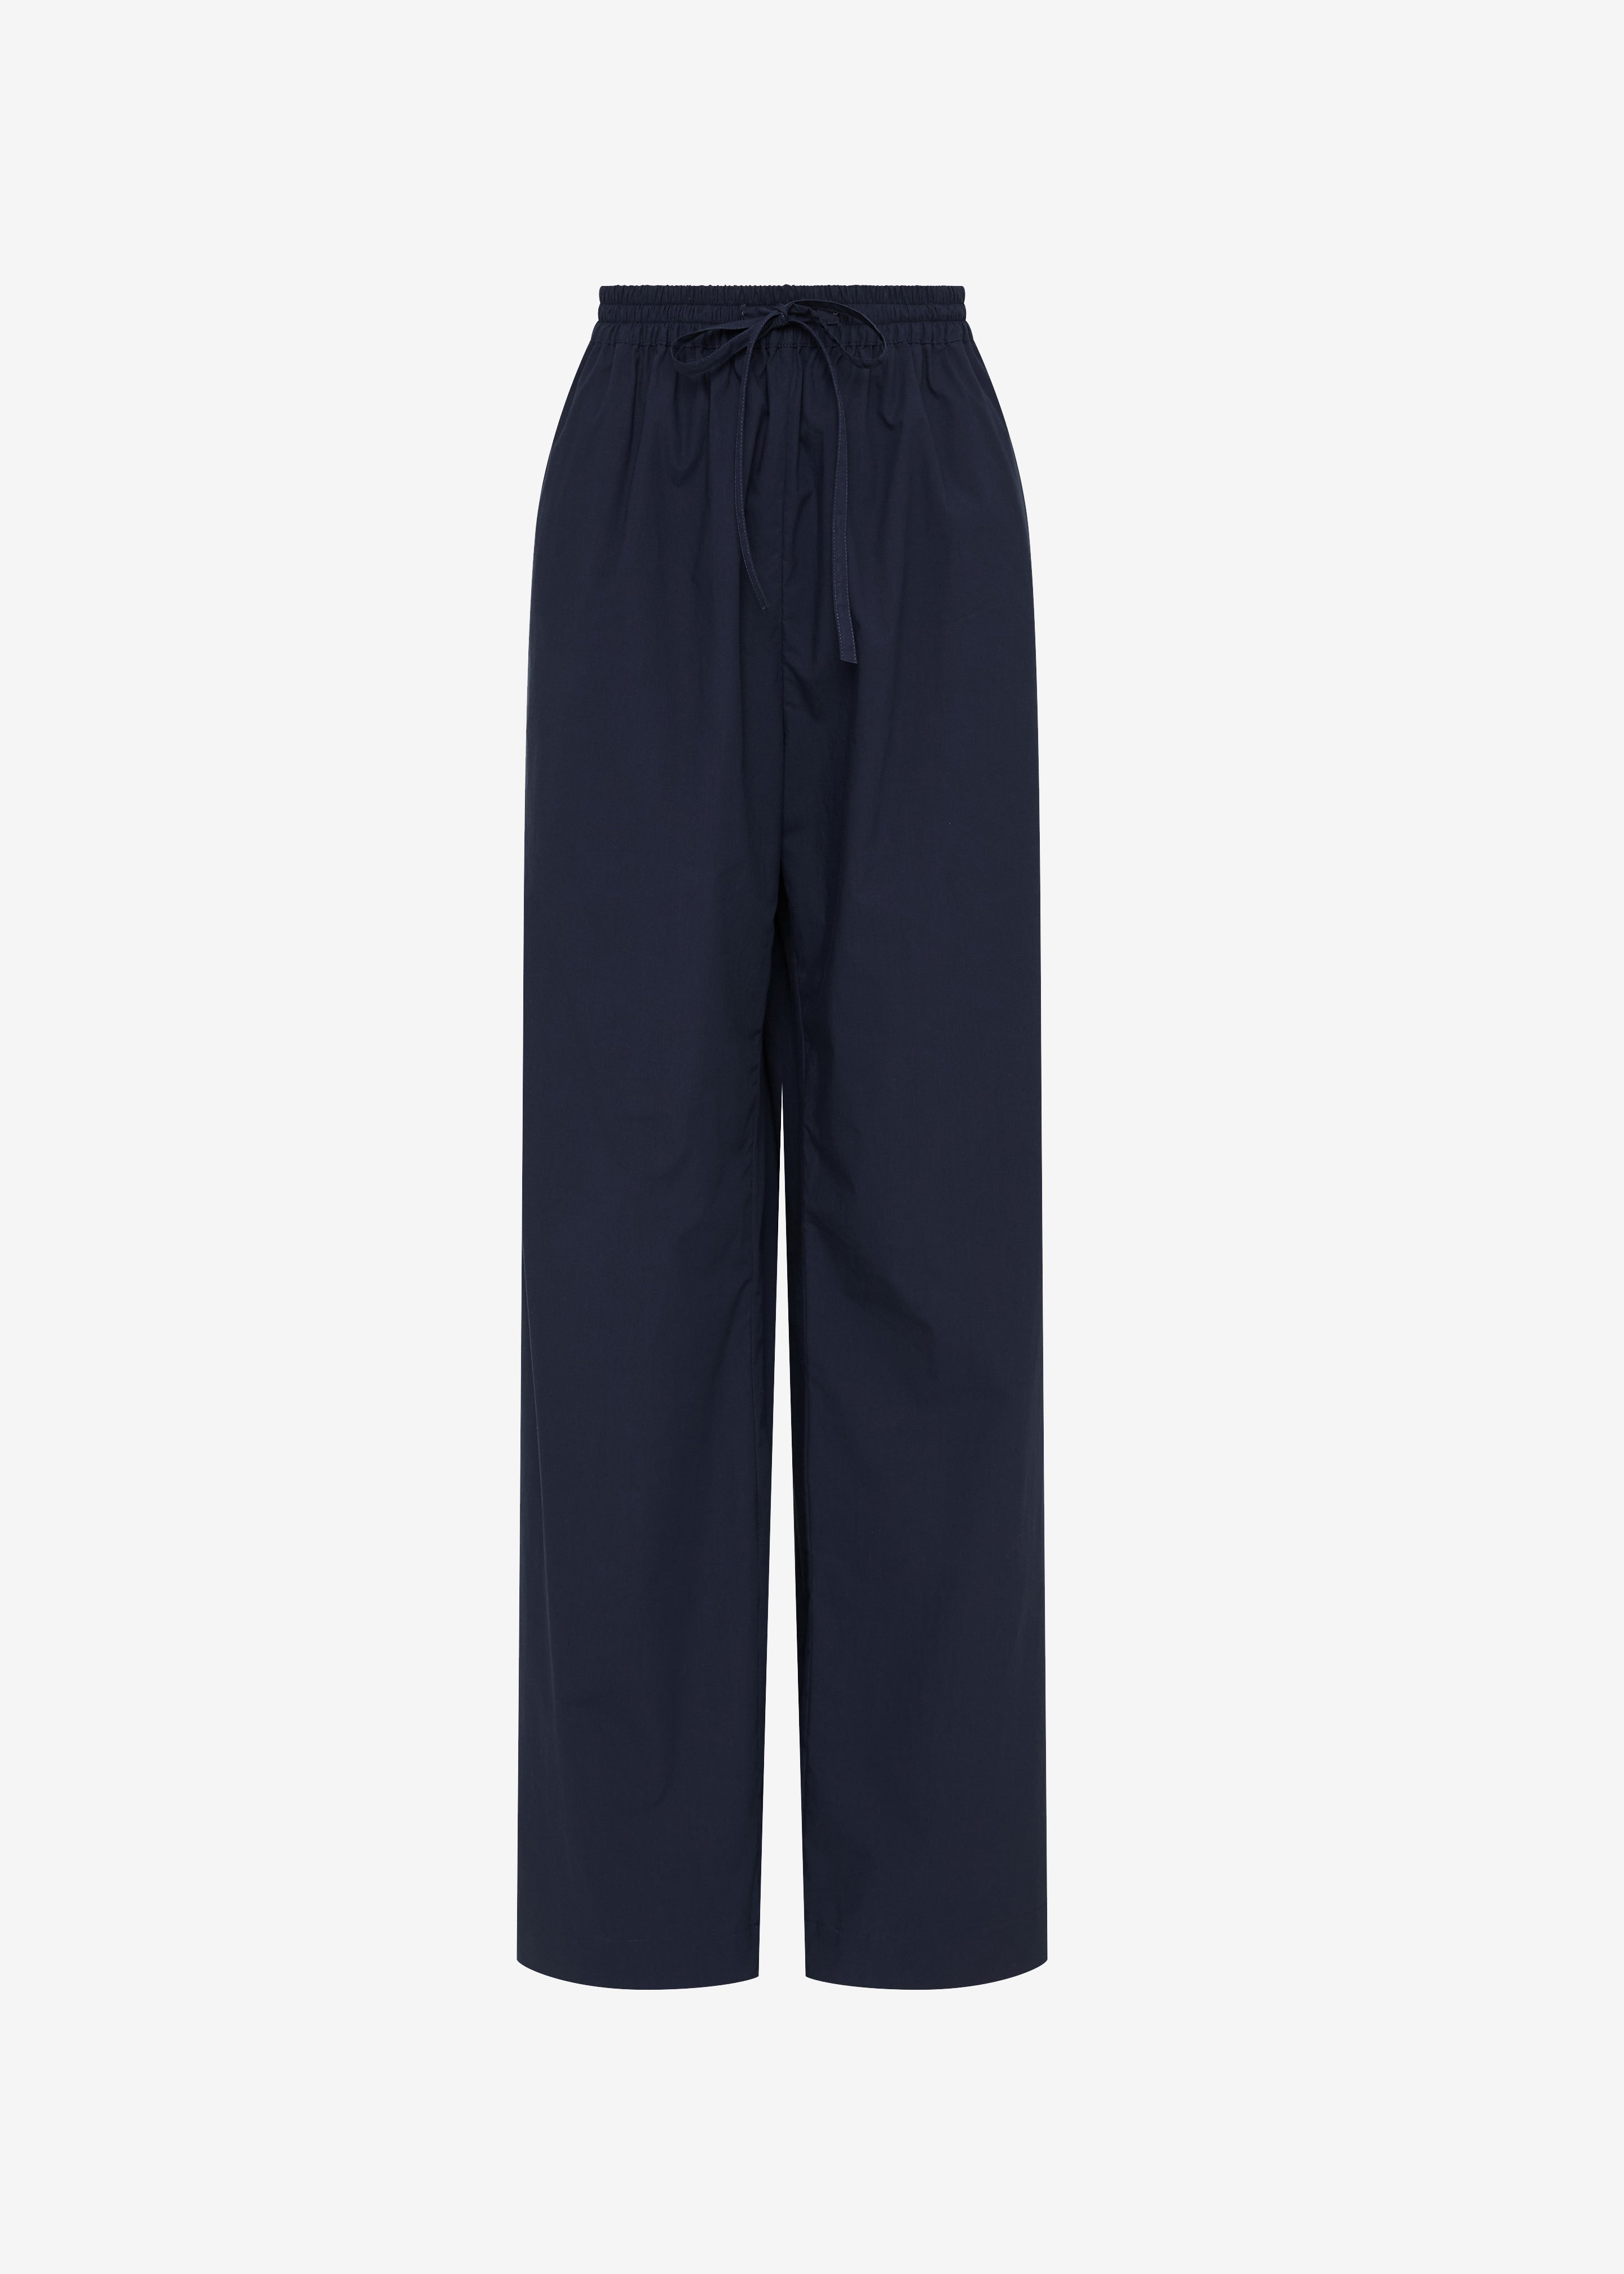 Matteau Relaxed Pant - Navy - 6